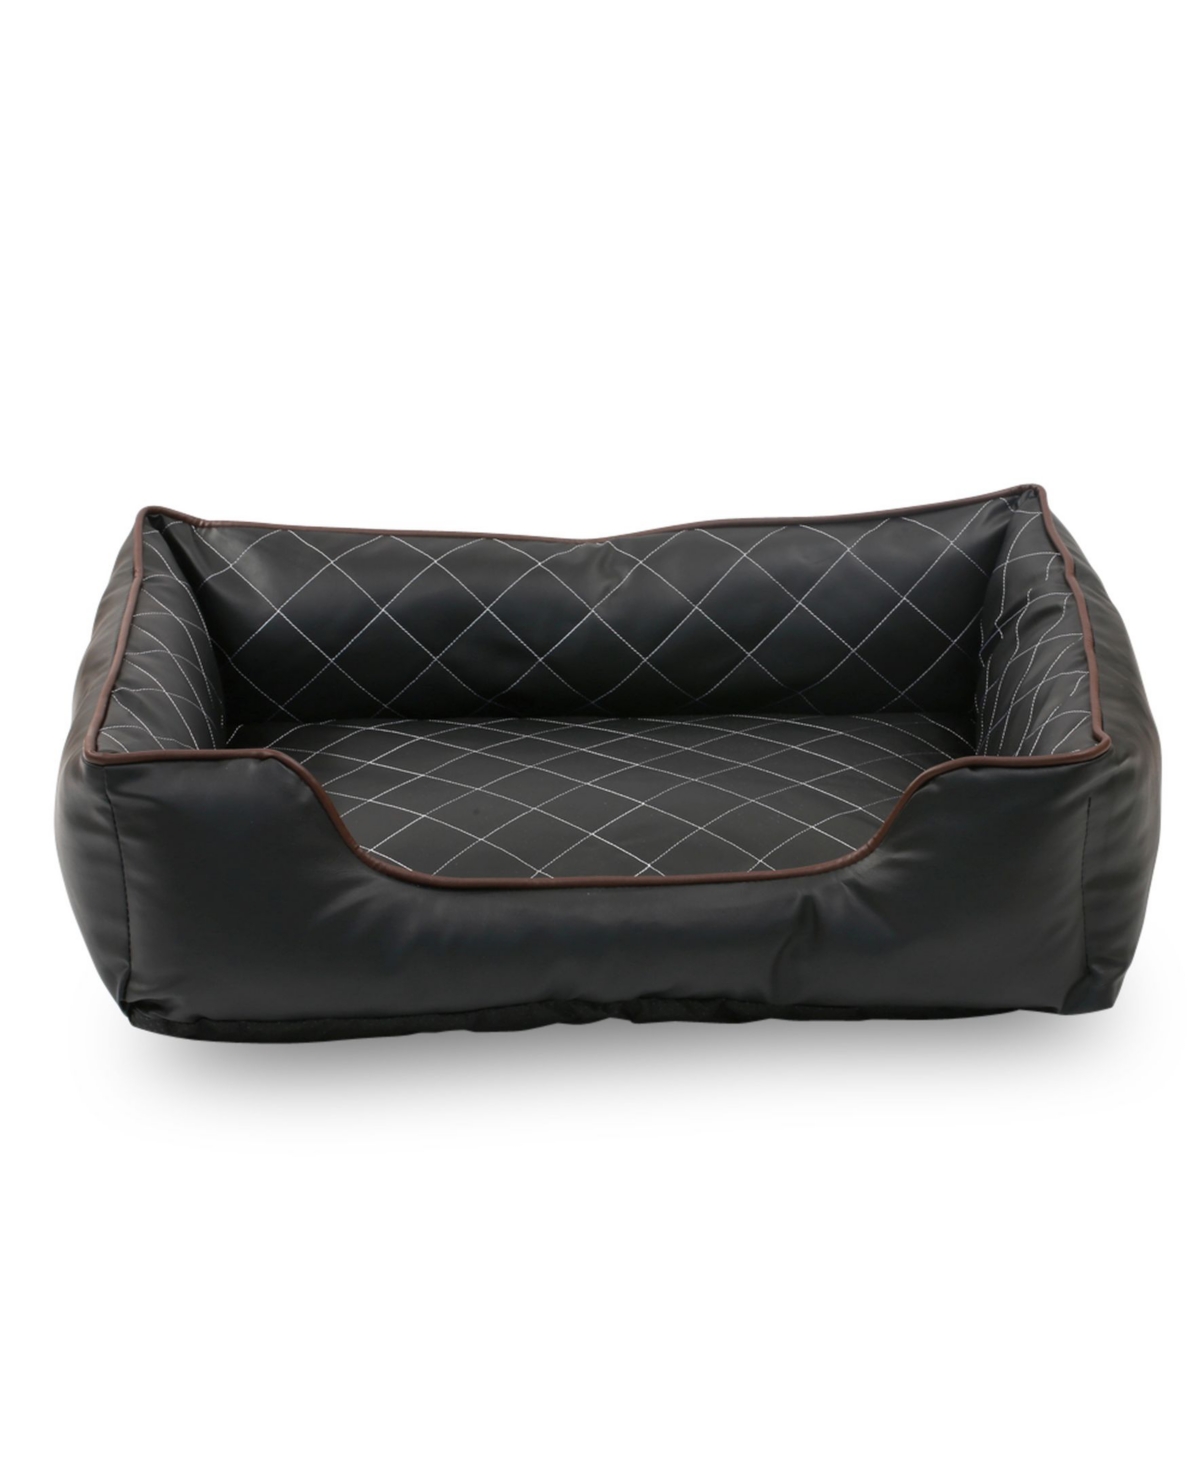 Happycare Textiles Luxury All Sides Faux Leather Rectangle Pet Bed, 31"x23" - Black